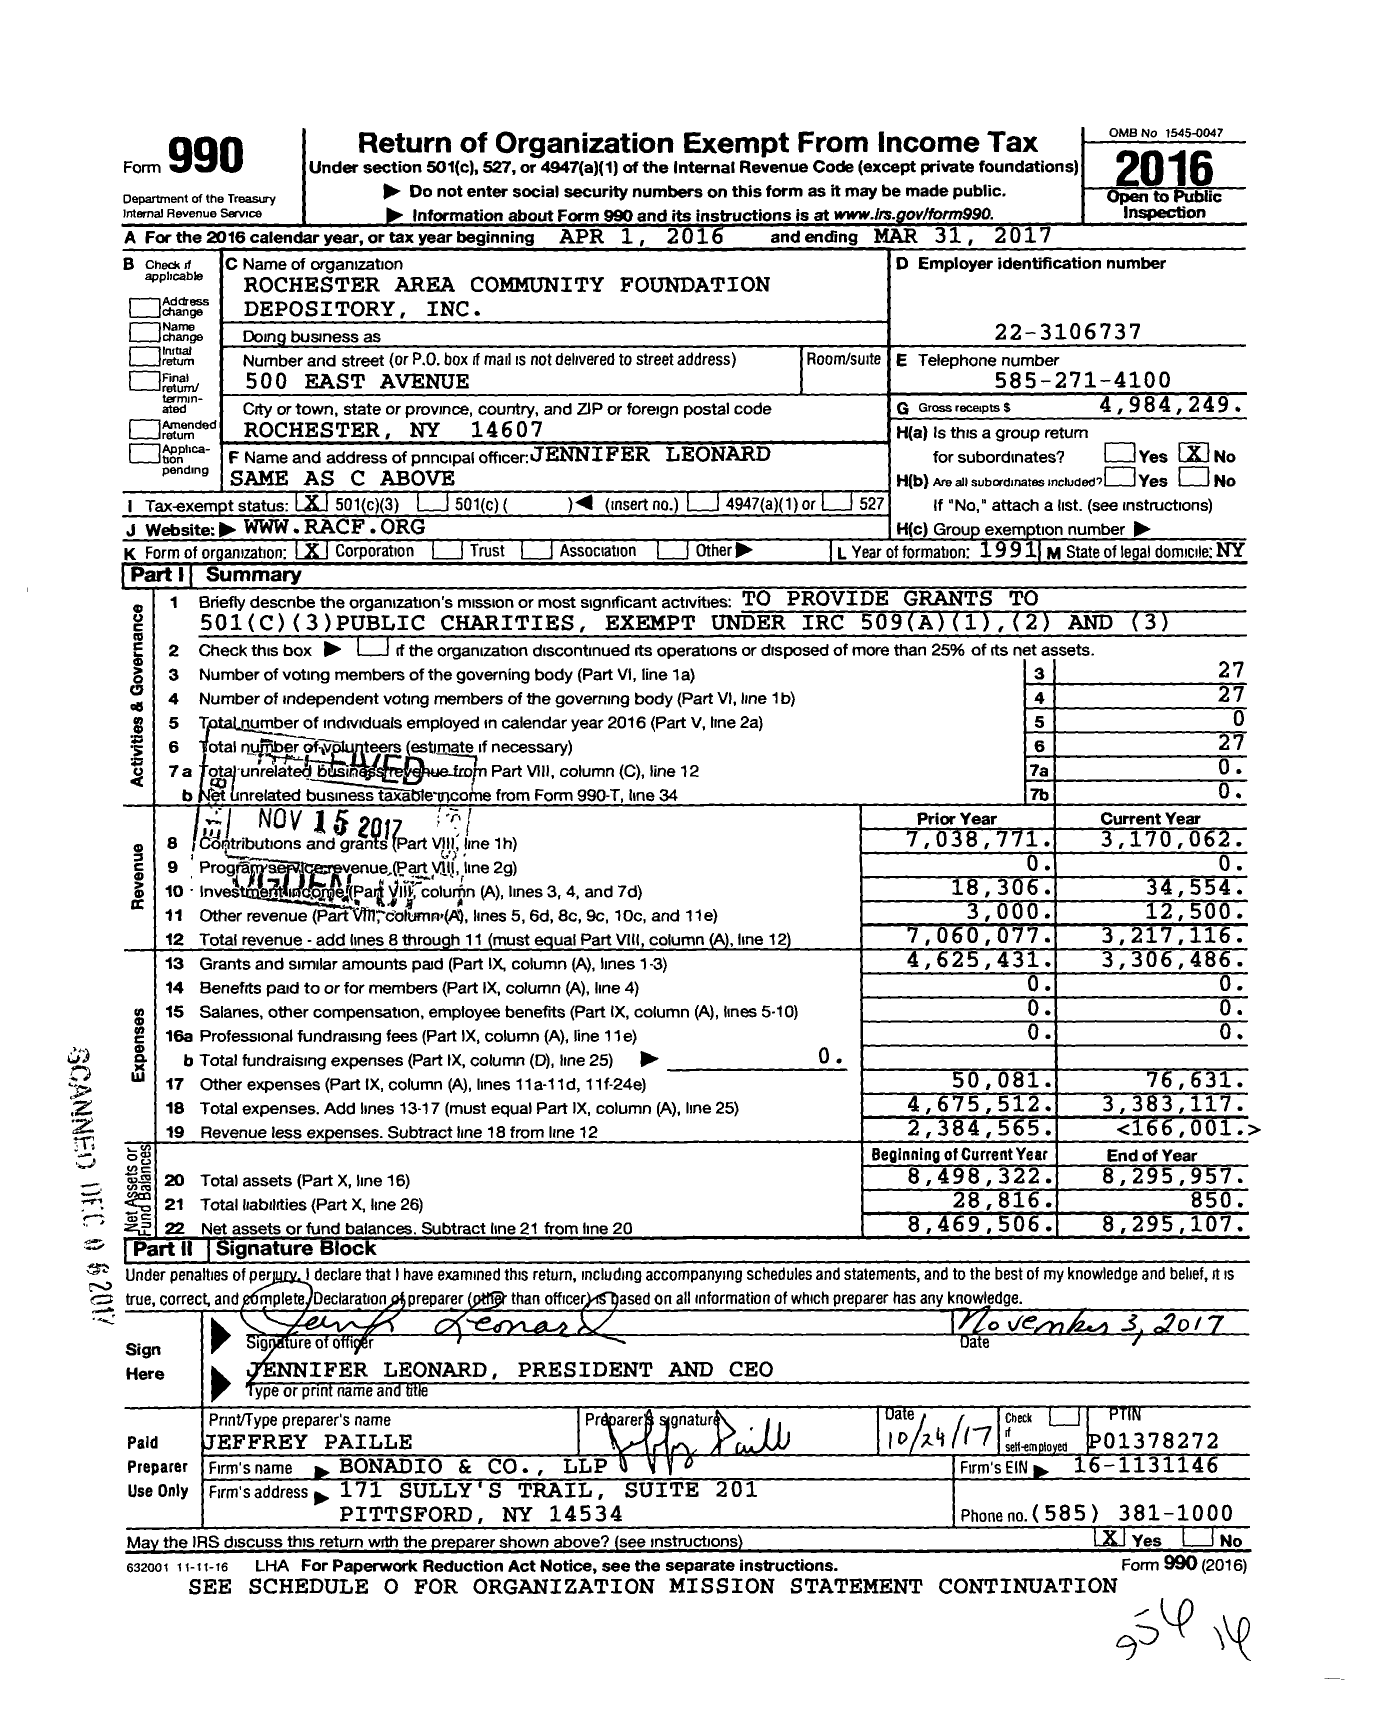 Image of first page of 2016 Form 990 for Rochester Area Community Foundation Depository